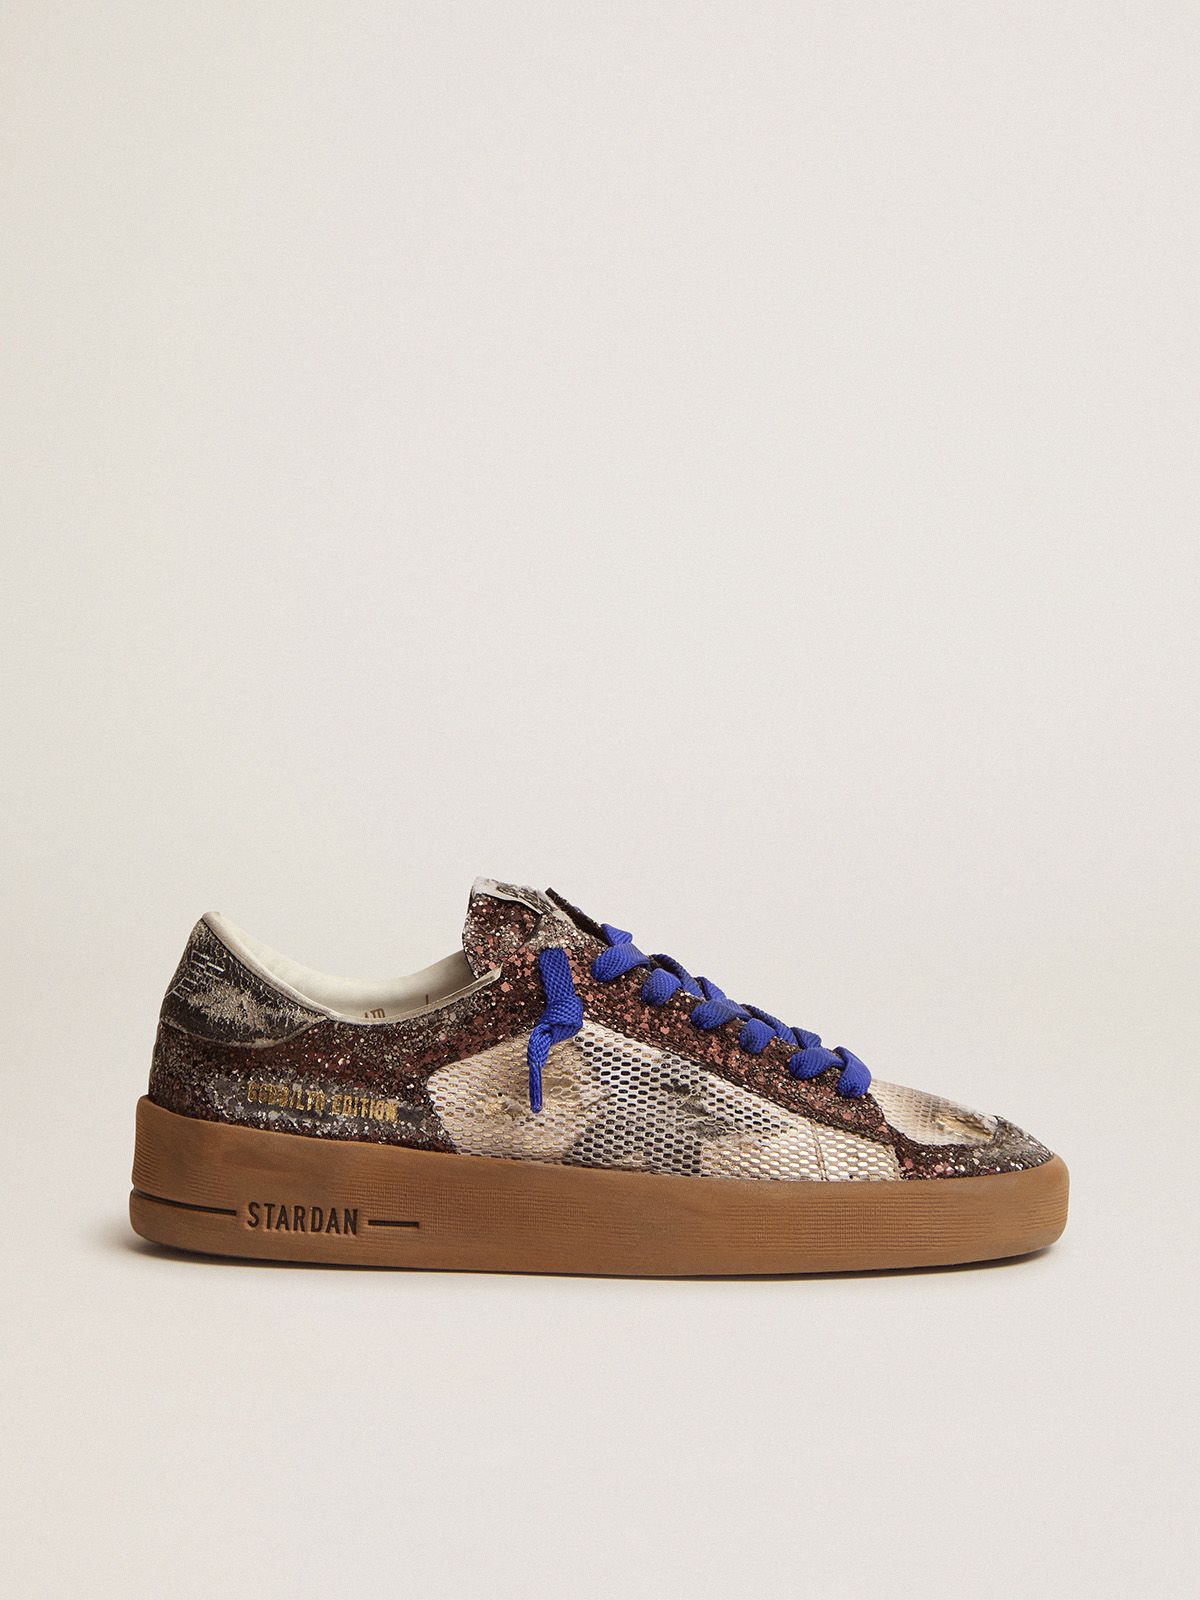 golden goose sneakers Stardan and LAB black crackle brown leather glitter upper star with